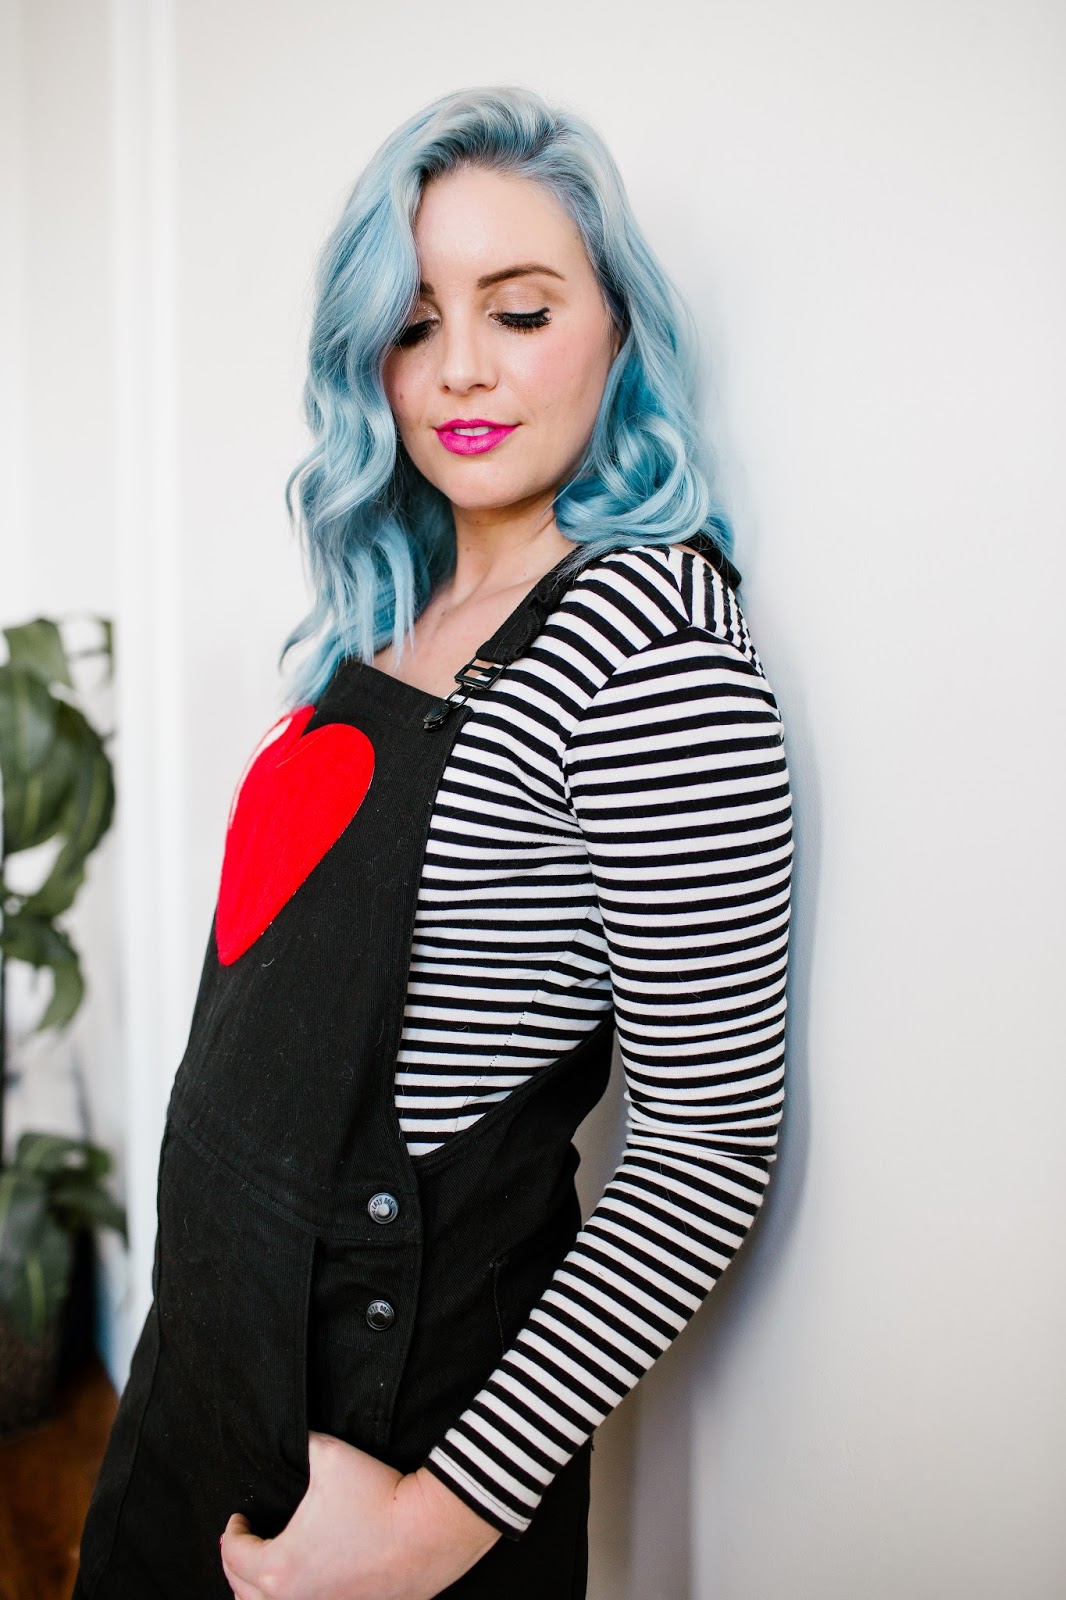 Blue Hair, ASOS, Valentine's Day Outfit, LipSense